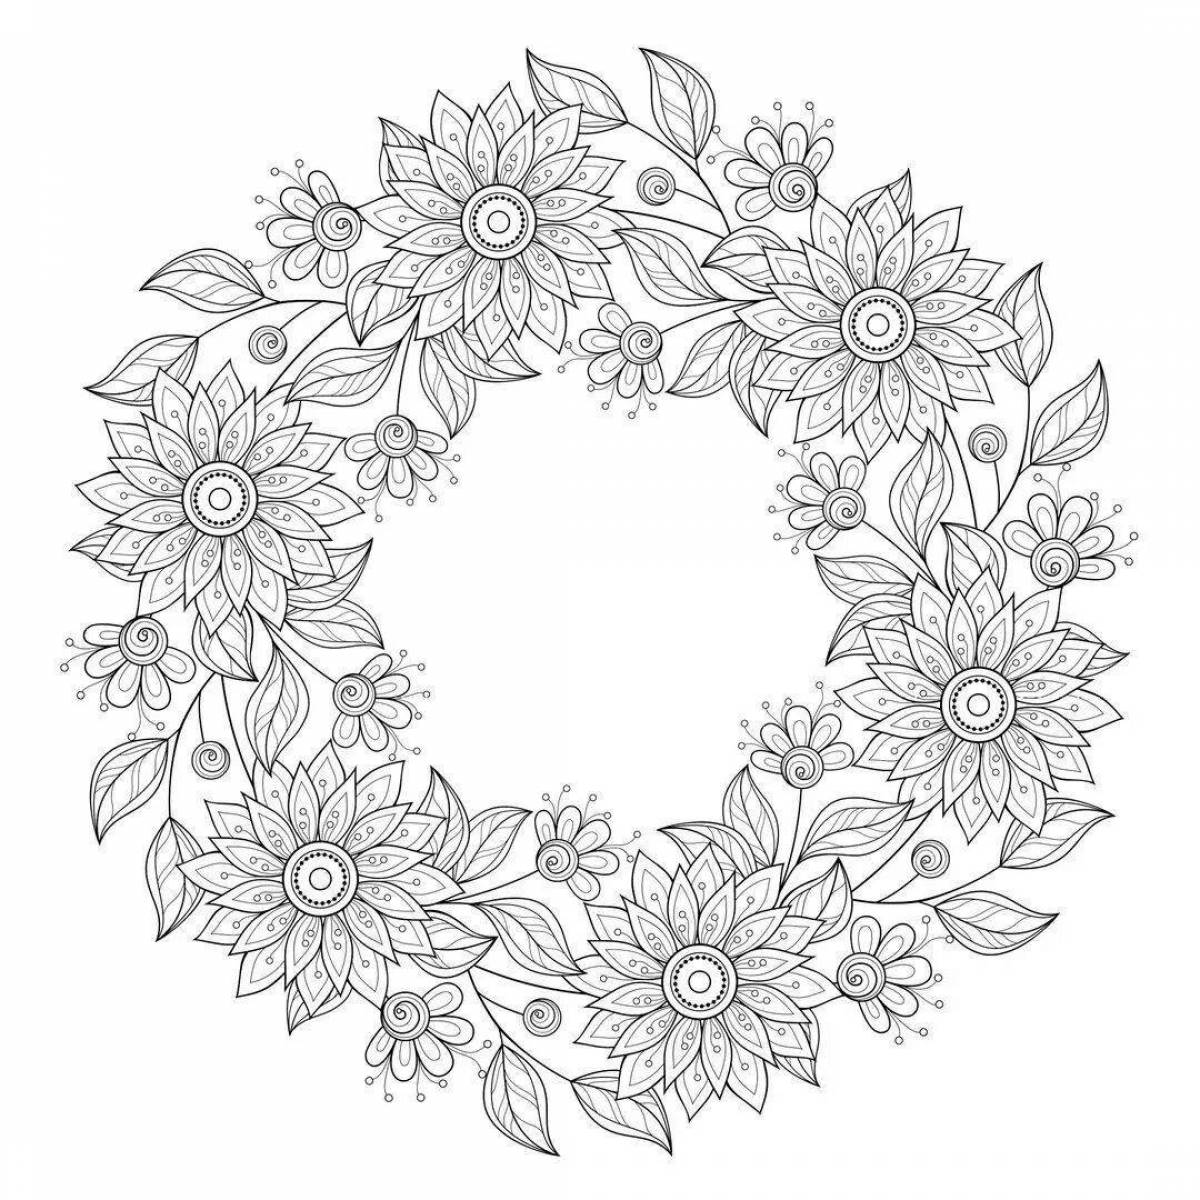 Coloring page festive flower wreath